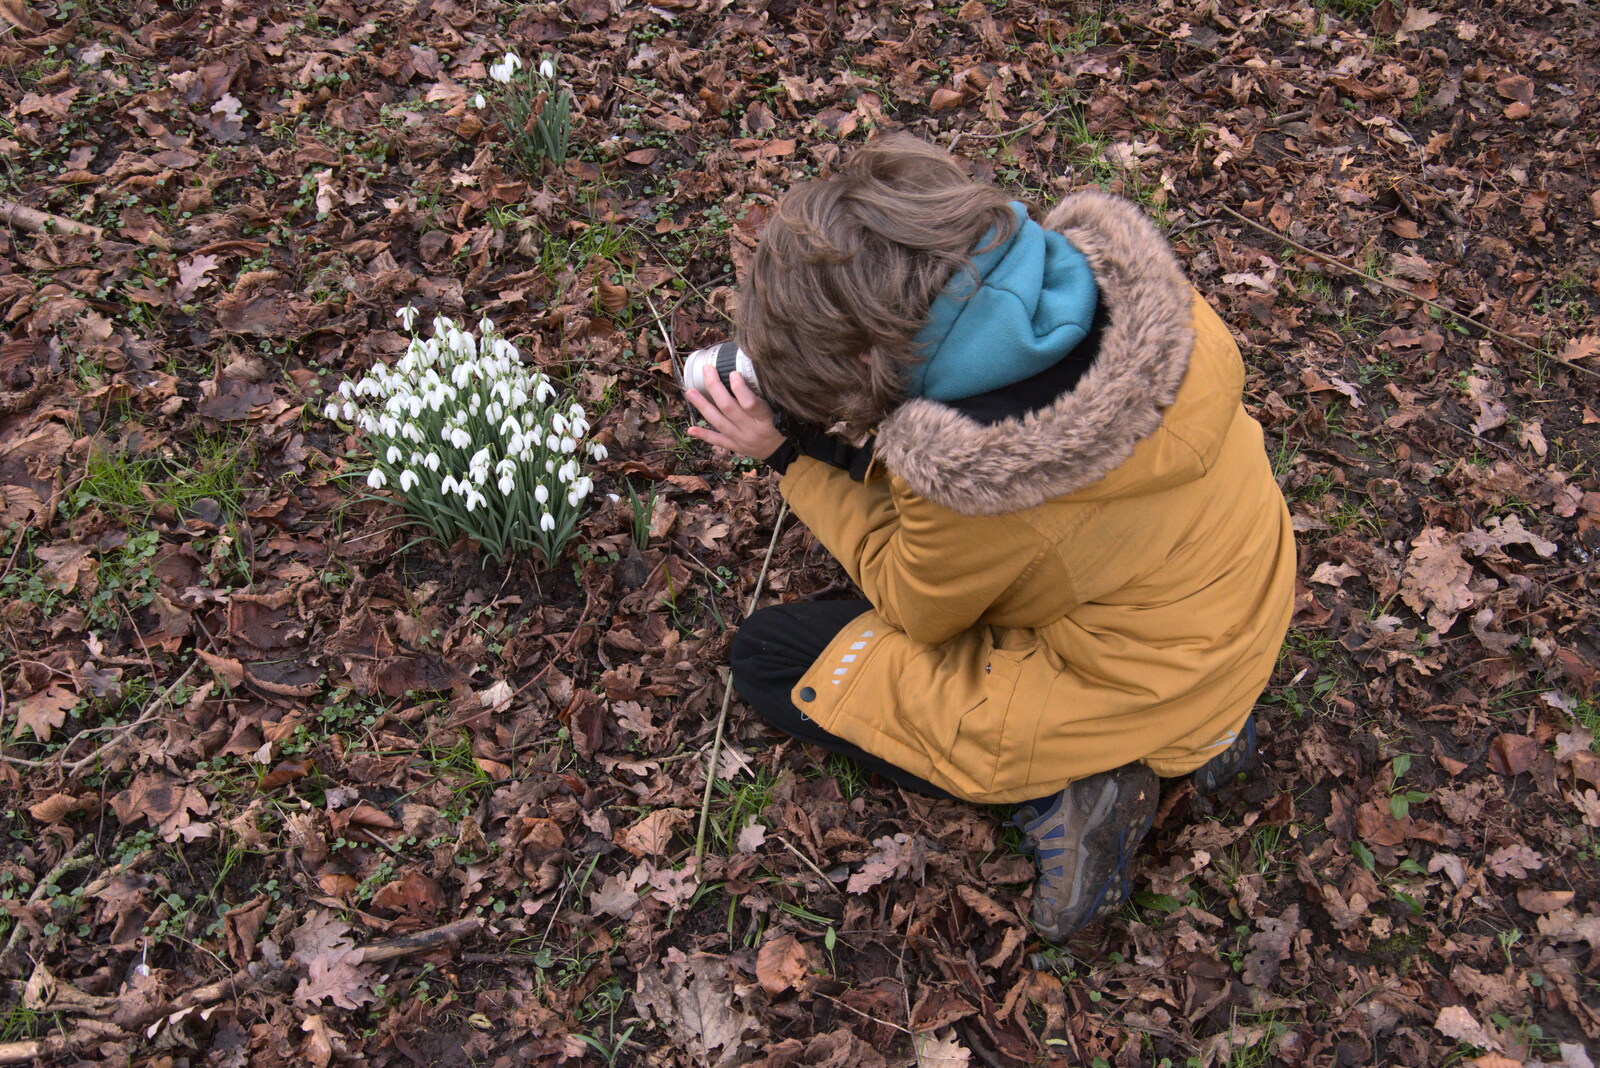 Fred photographs the snowdrops from Snowdrops at Talconeston Hall, Tacolneston, Norfolk - 7th February 2020